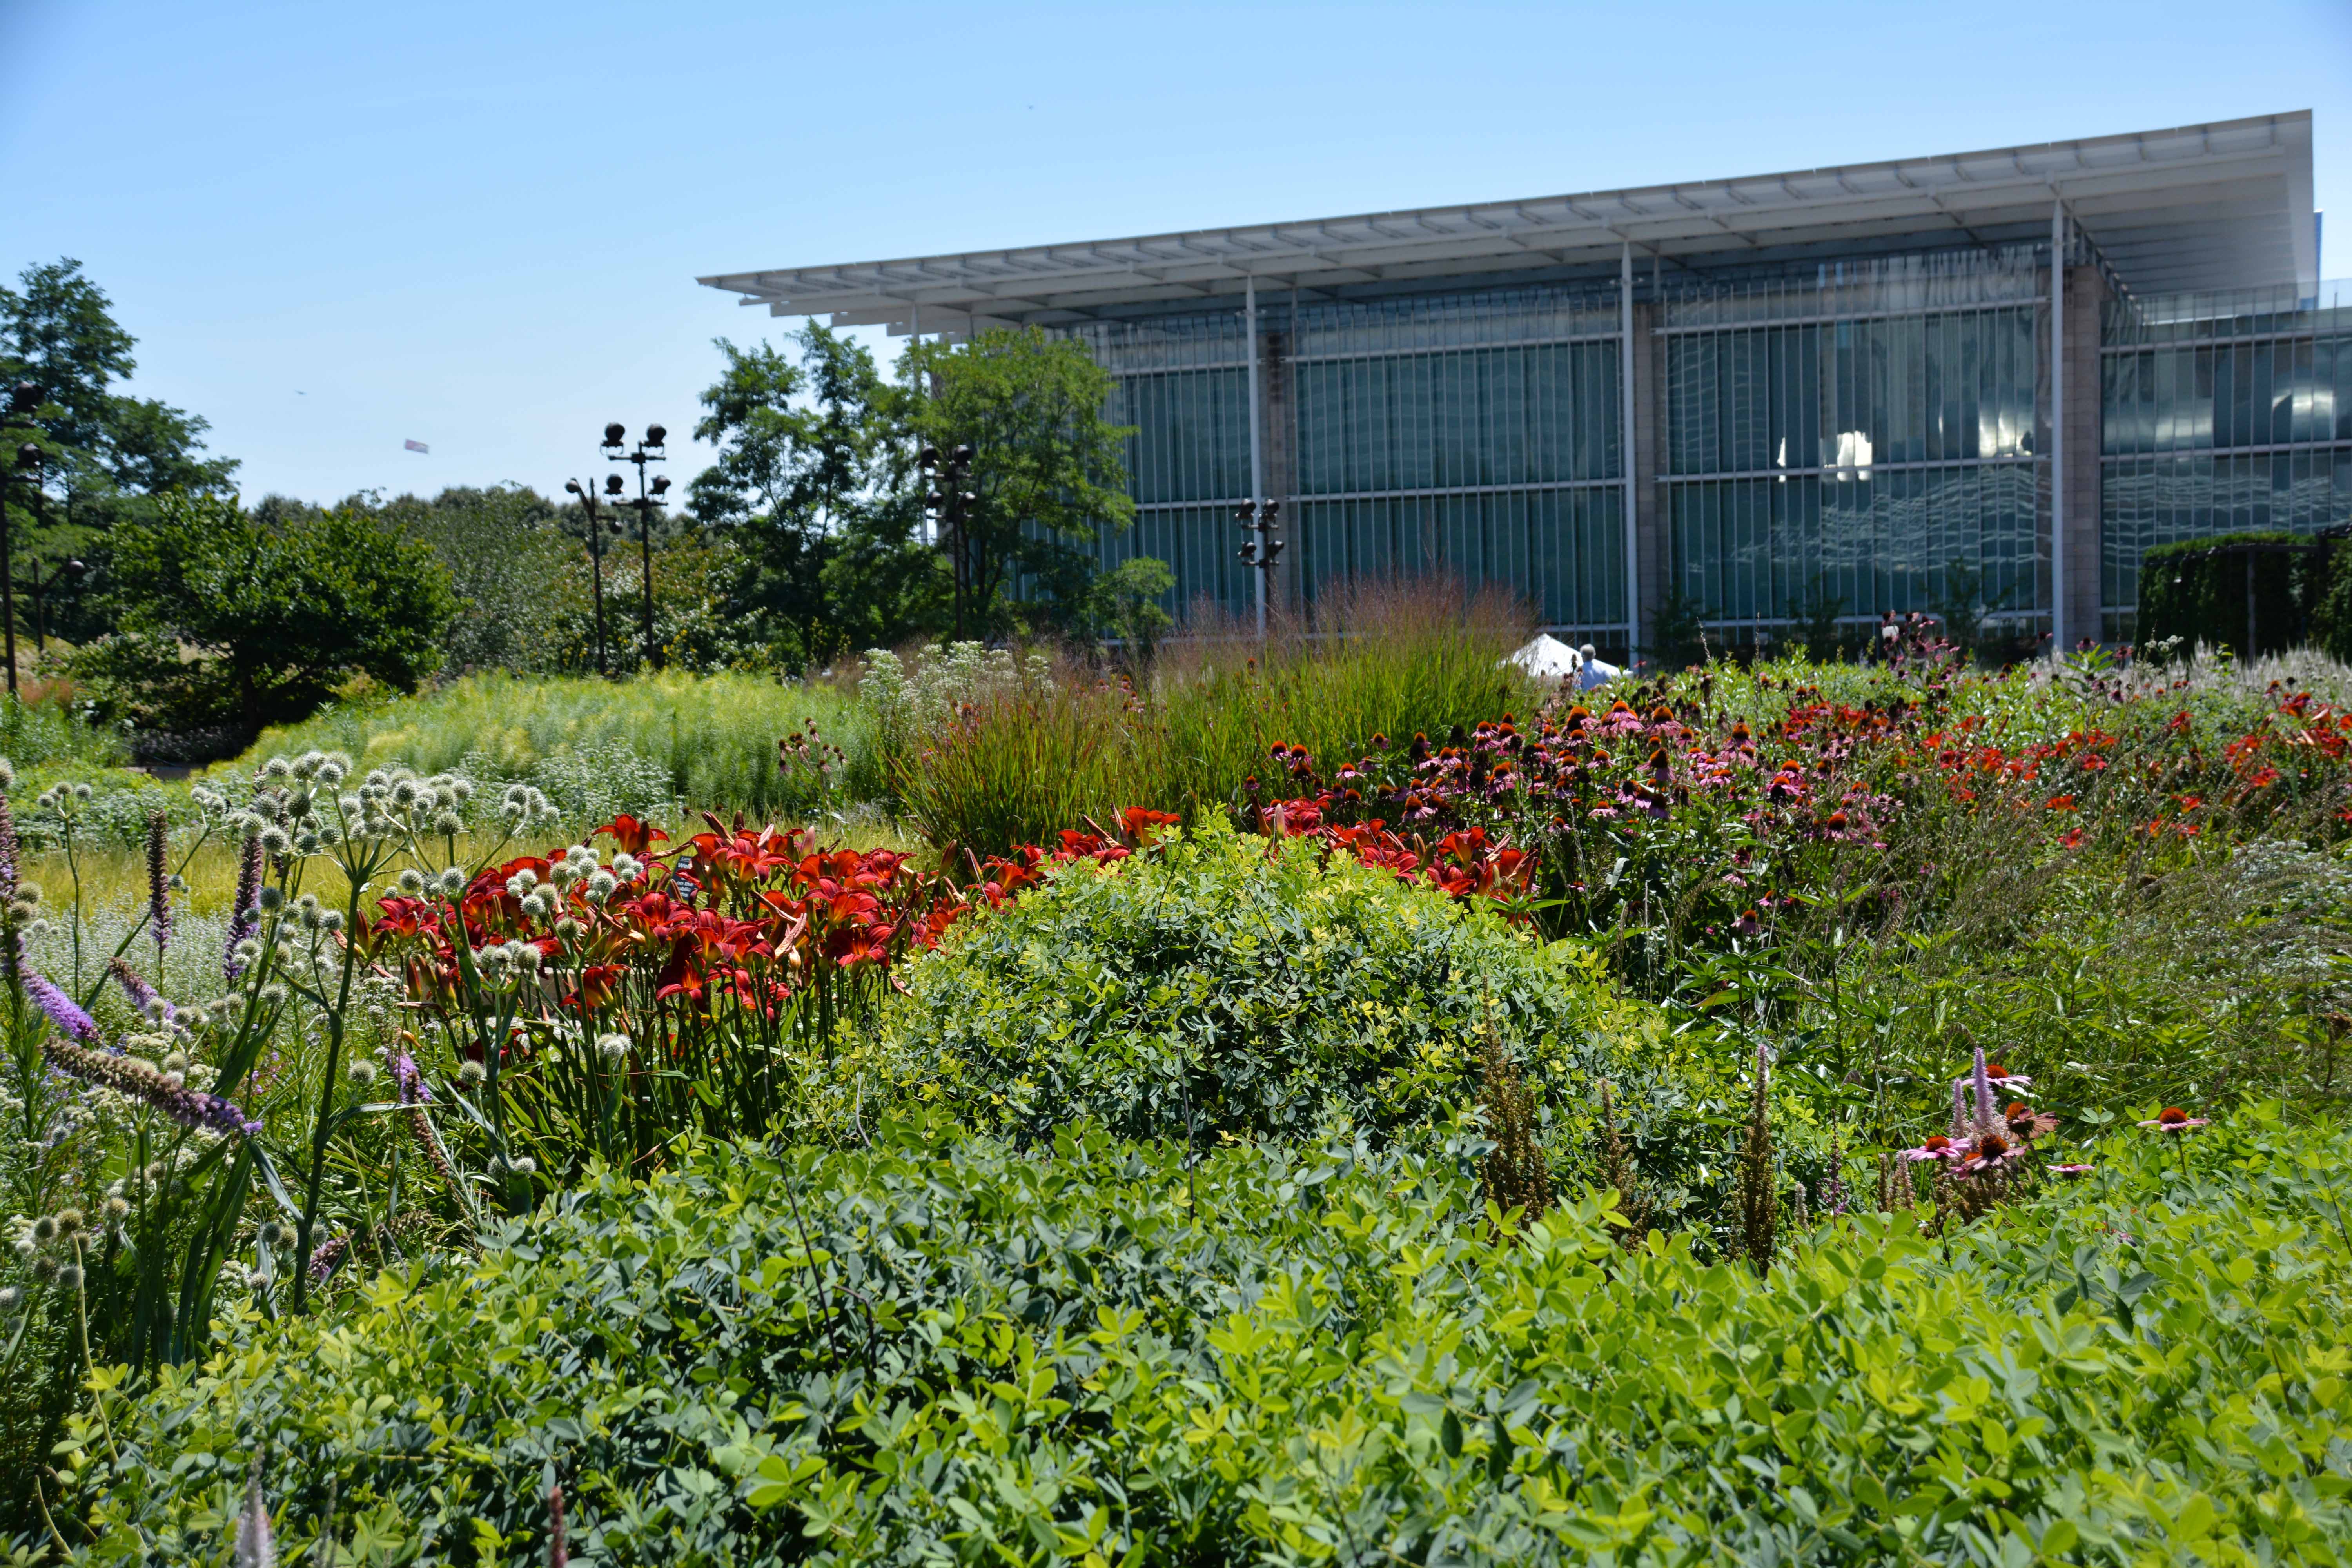 The Lurie Garden - Our Great Midwest Road Trip, Thinking Outside the Boxwood